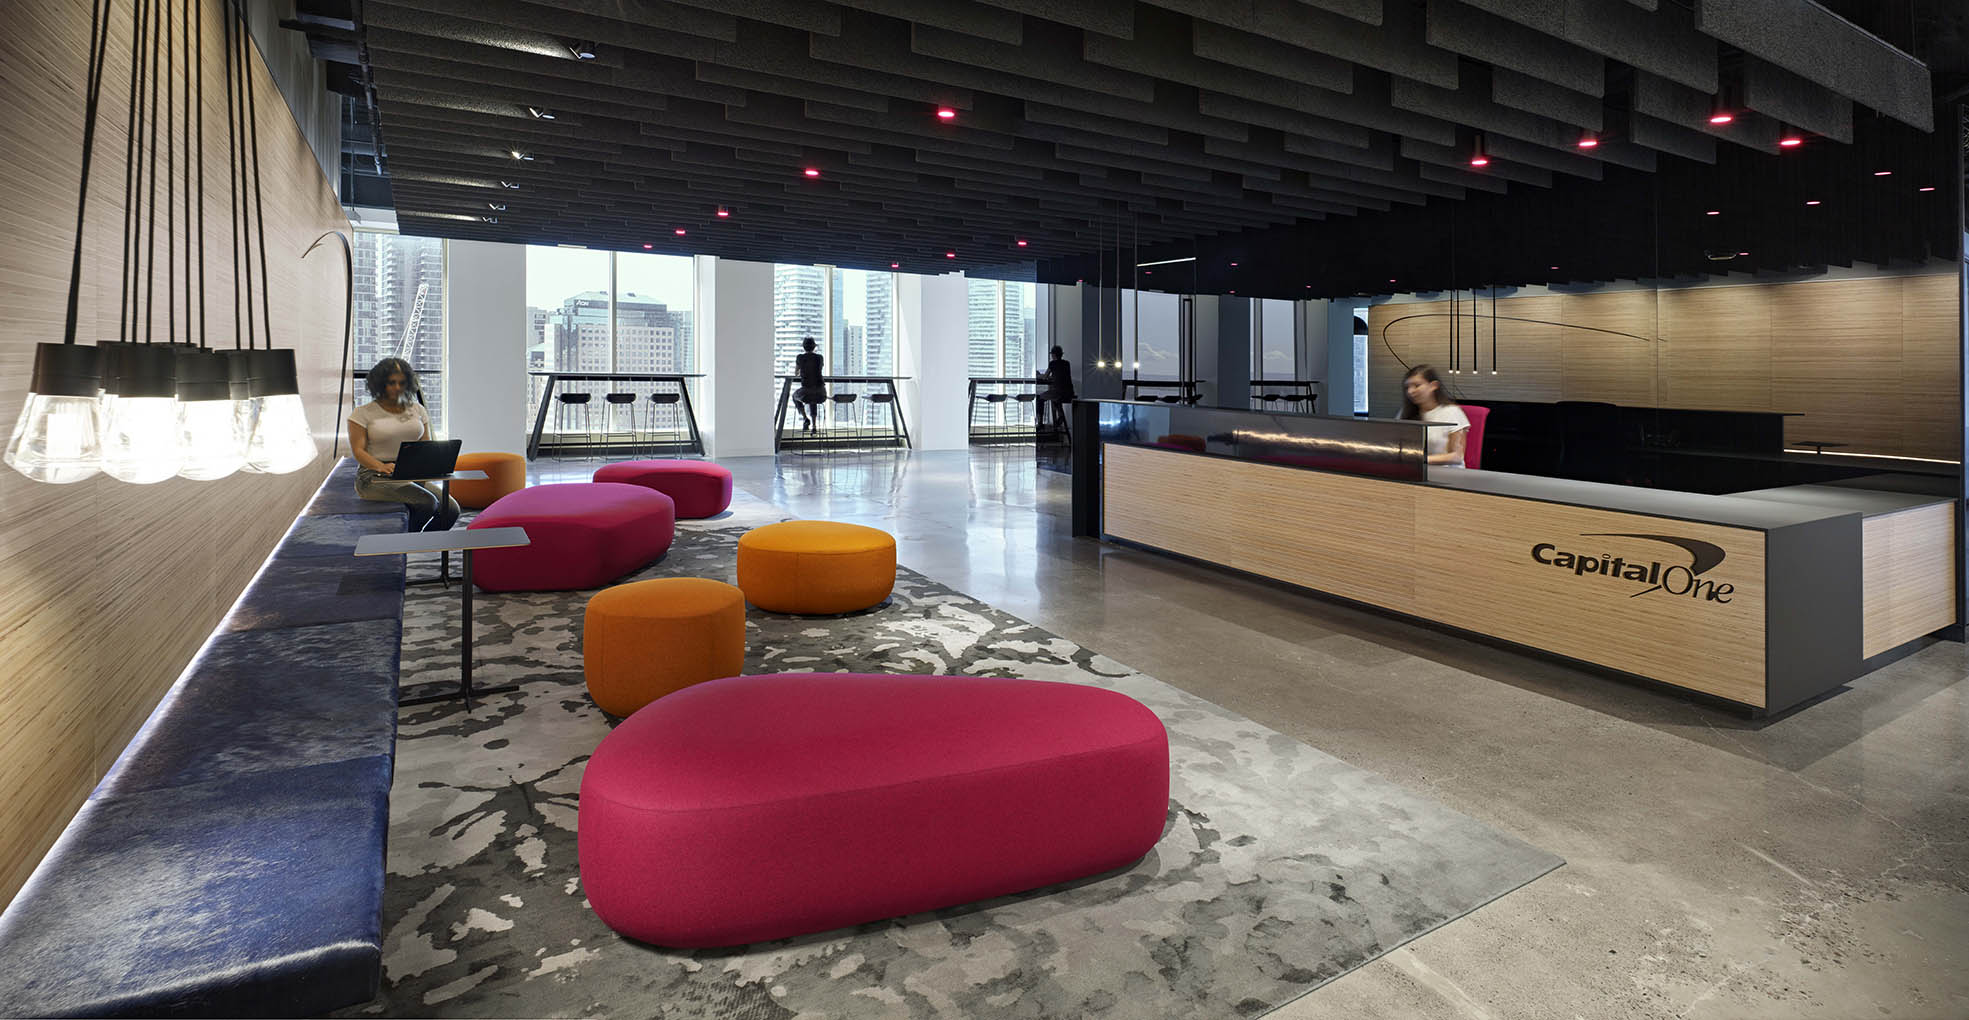 A colorful multi-level work space that links human senses, nature, and technology